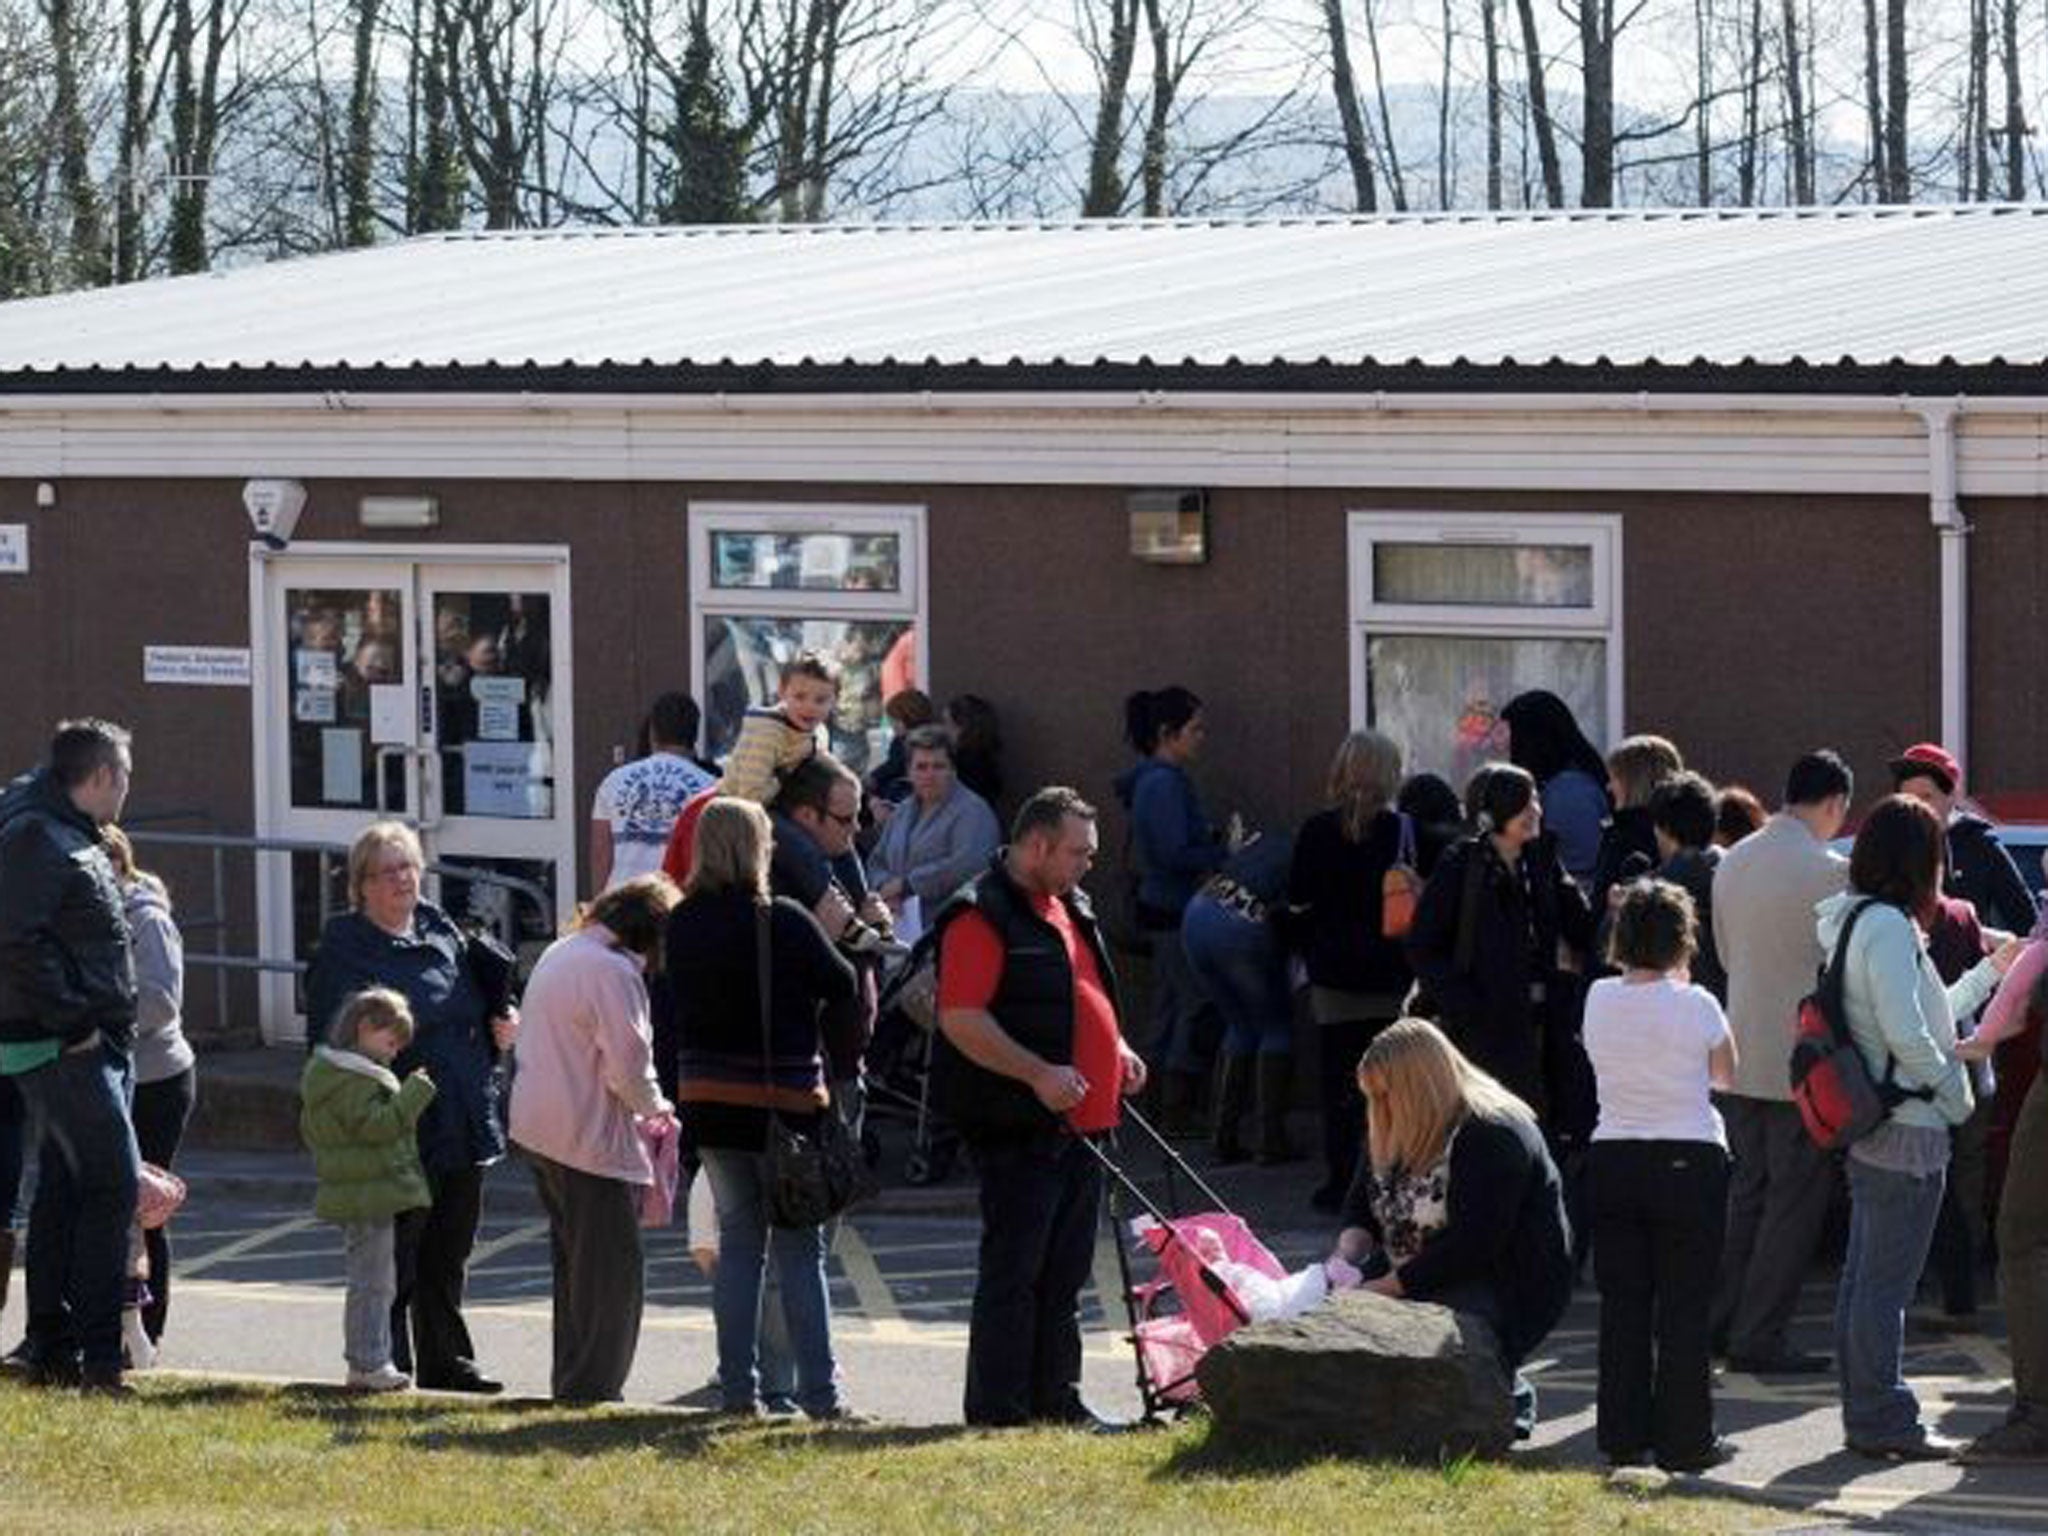 Parents and children queue two weeks ago outside the Paediatric Outpatient department at Morriston Hospital in Swansea